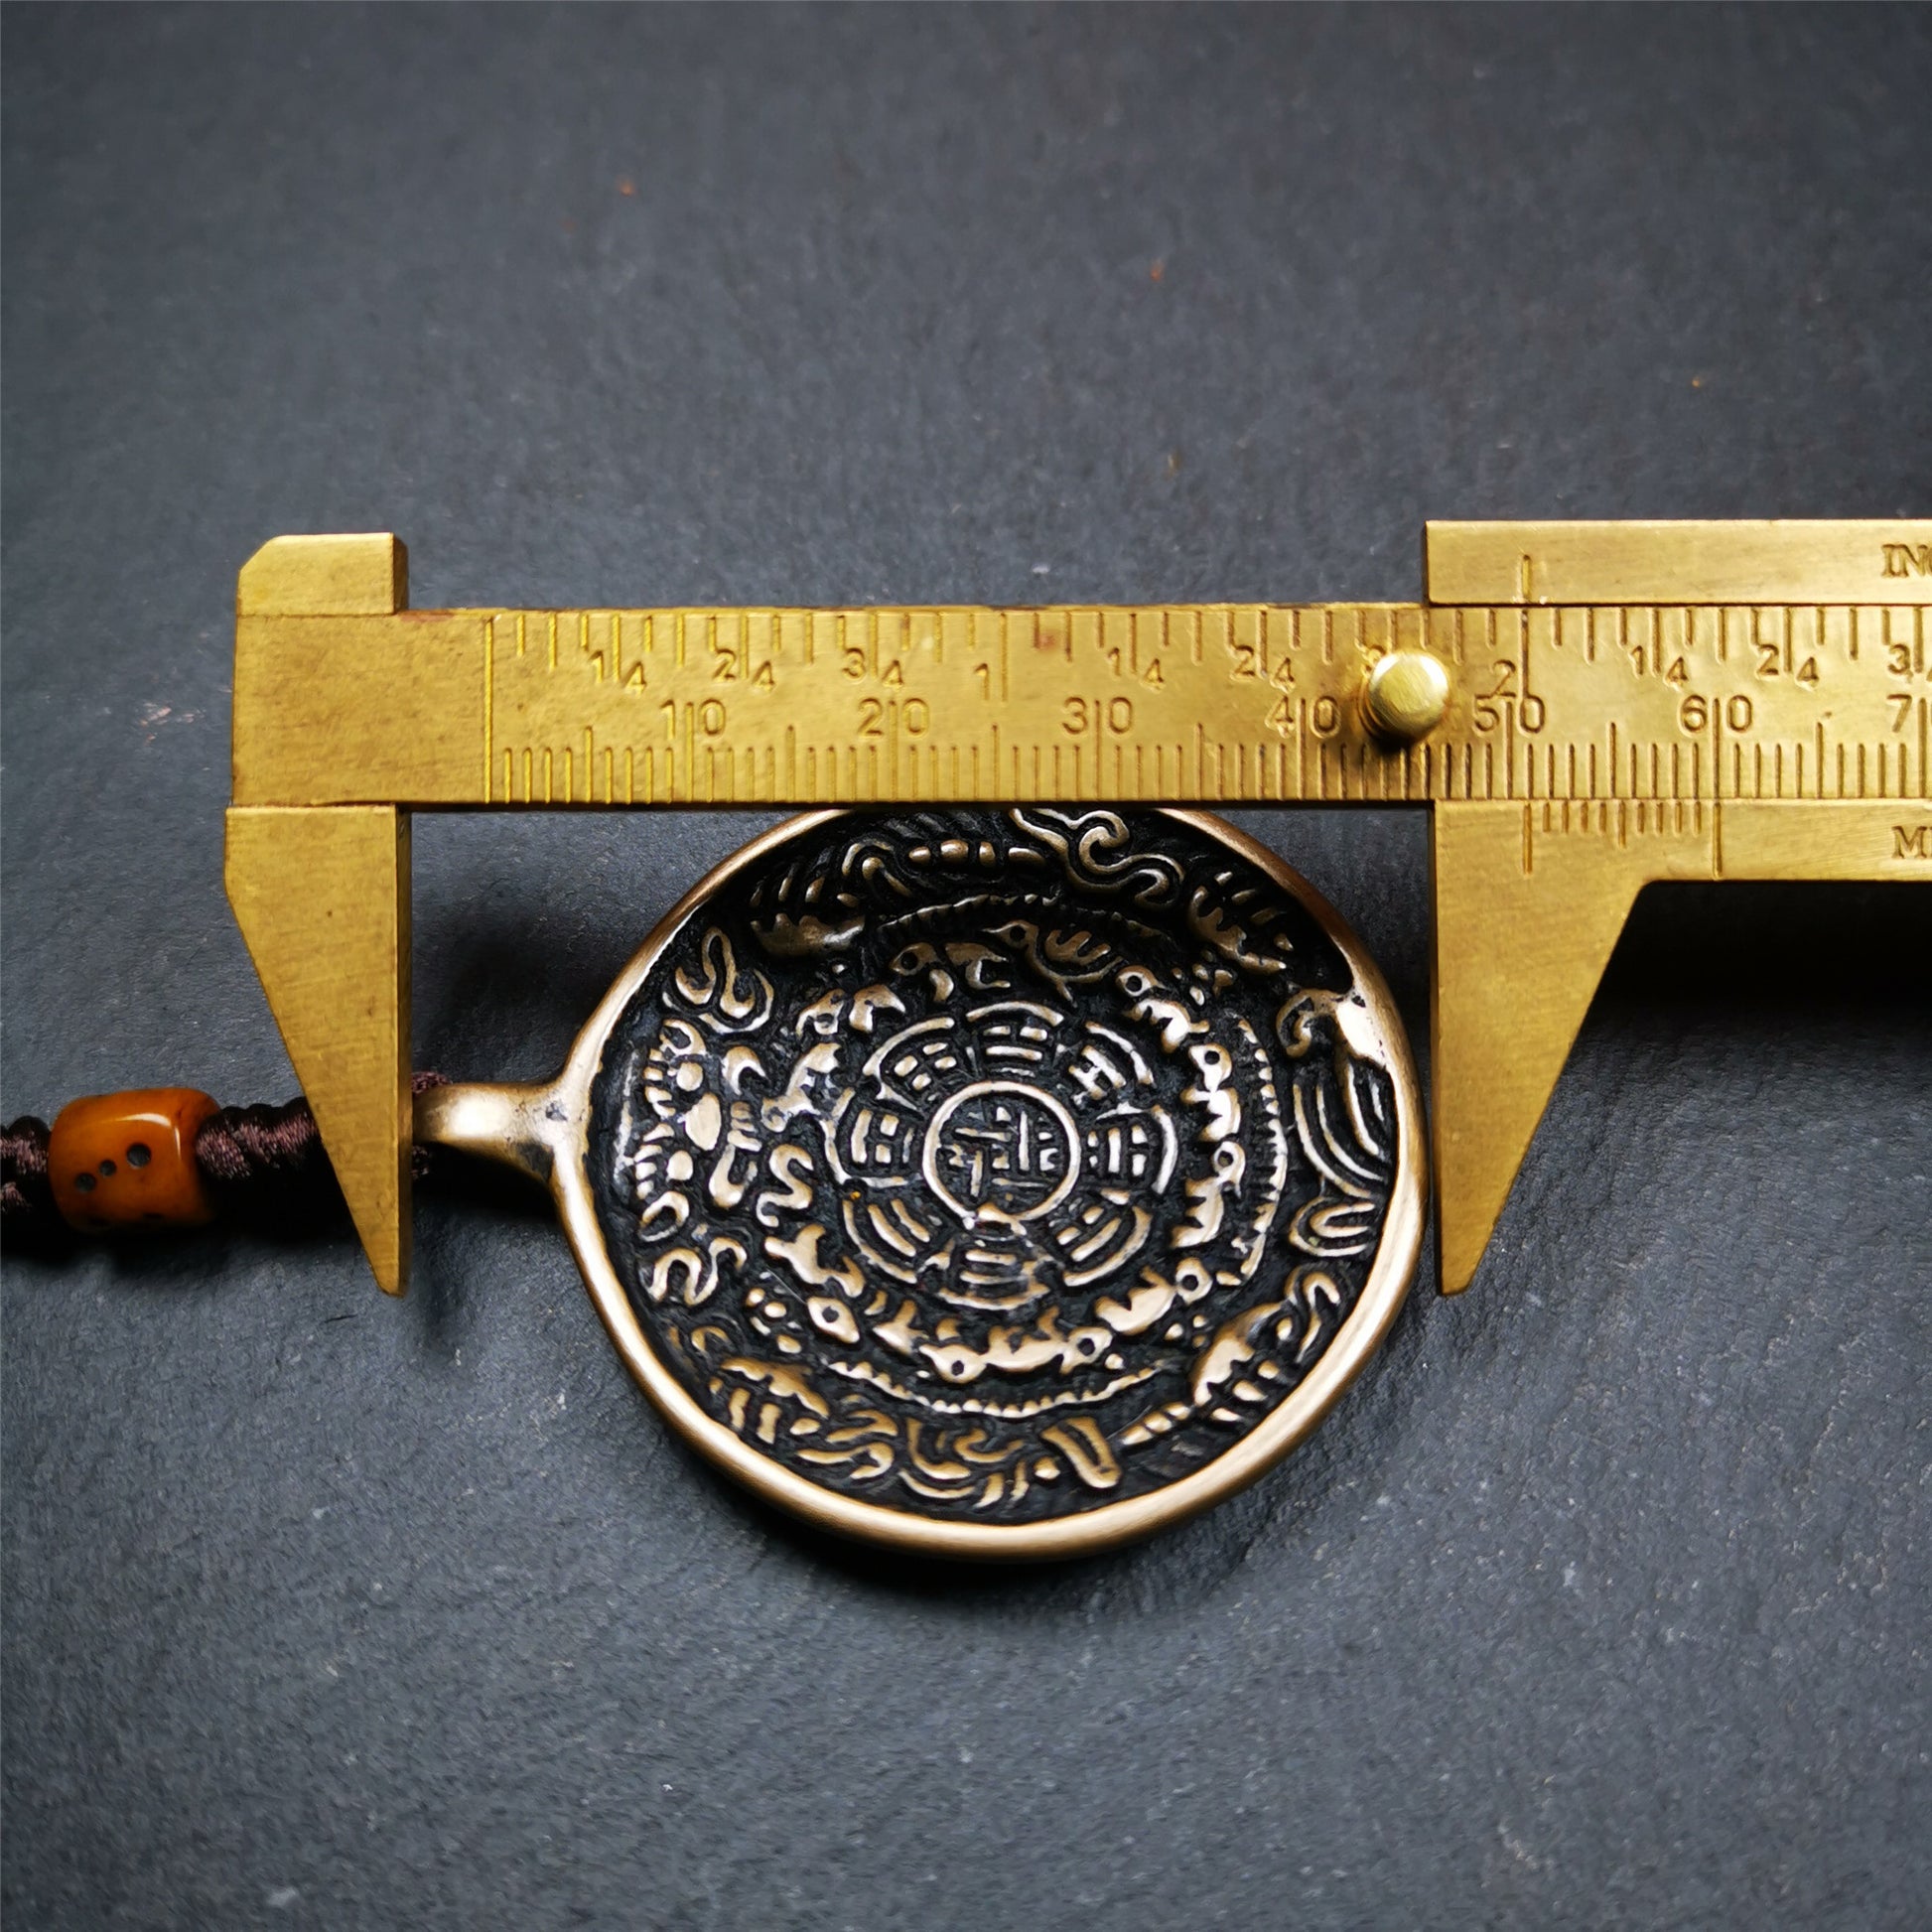 This unique tibetan calendar melong badge was collected from Baiyu Monastery for 30 years. It's a Astrology Protective Amulet Pendant,made of copper. The pattern is Tibetan Budhist Protective Amulet Pendant - SIPAHO(srid pa ho).